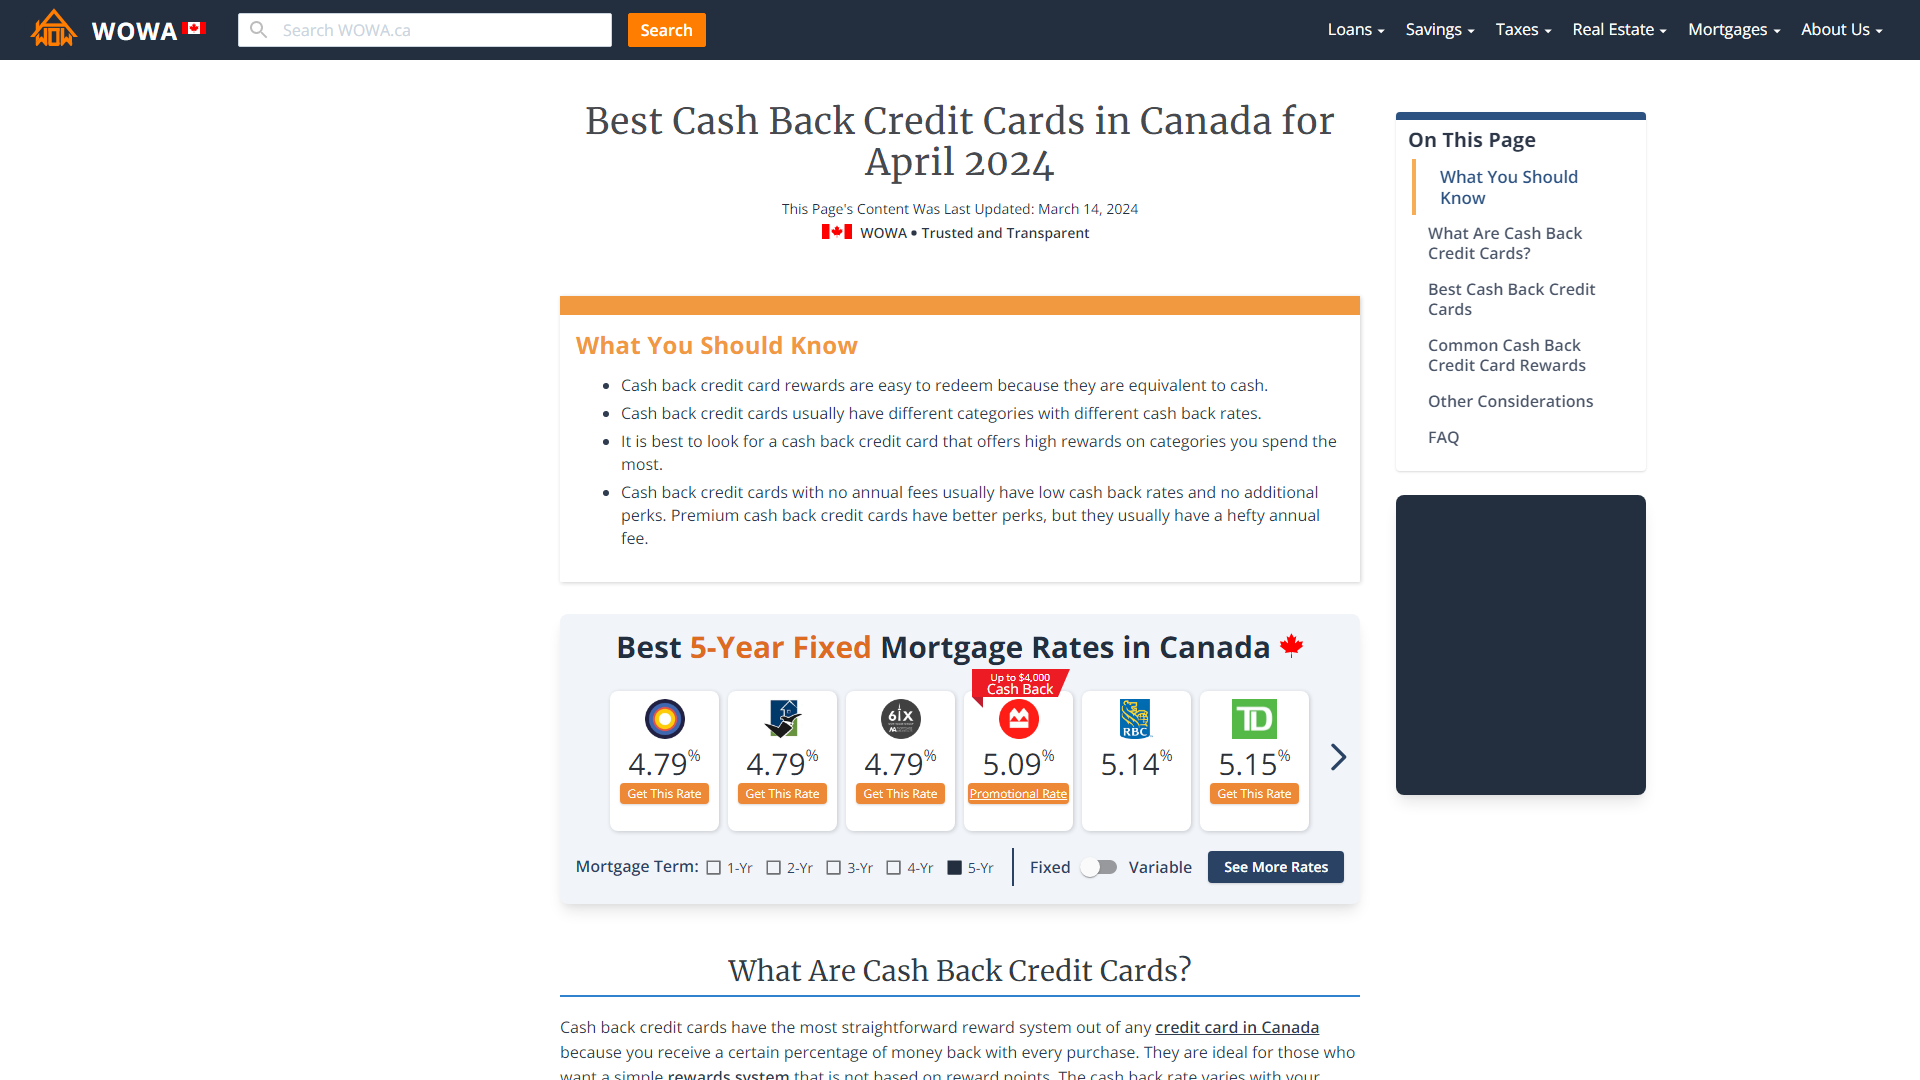 10-best-cash-back-credit-cards-in-canada-for-october-2022-wowa-ca